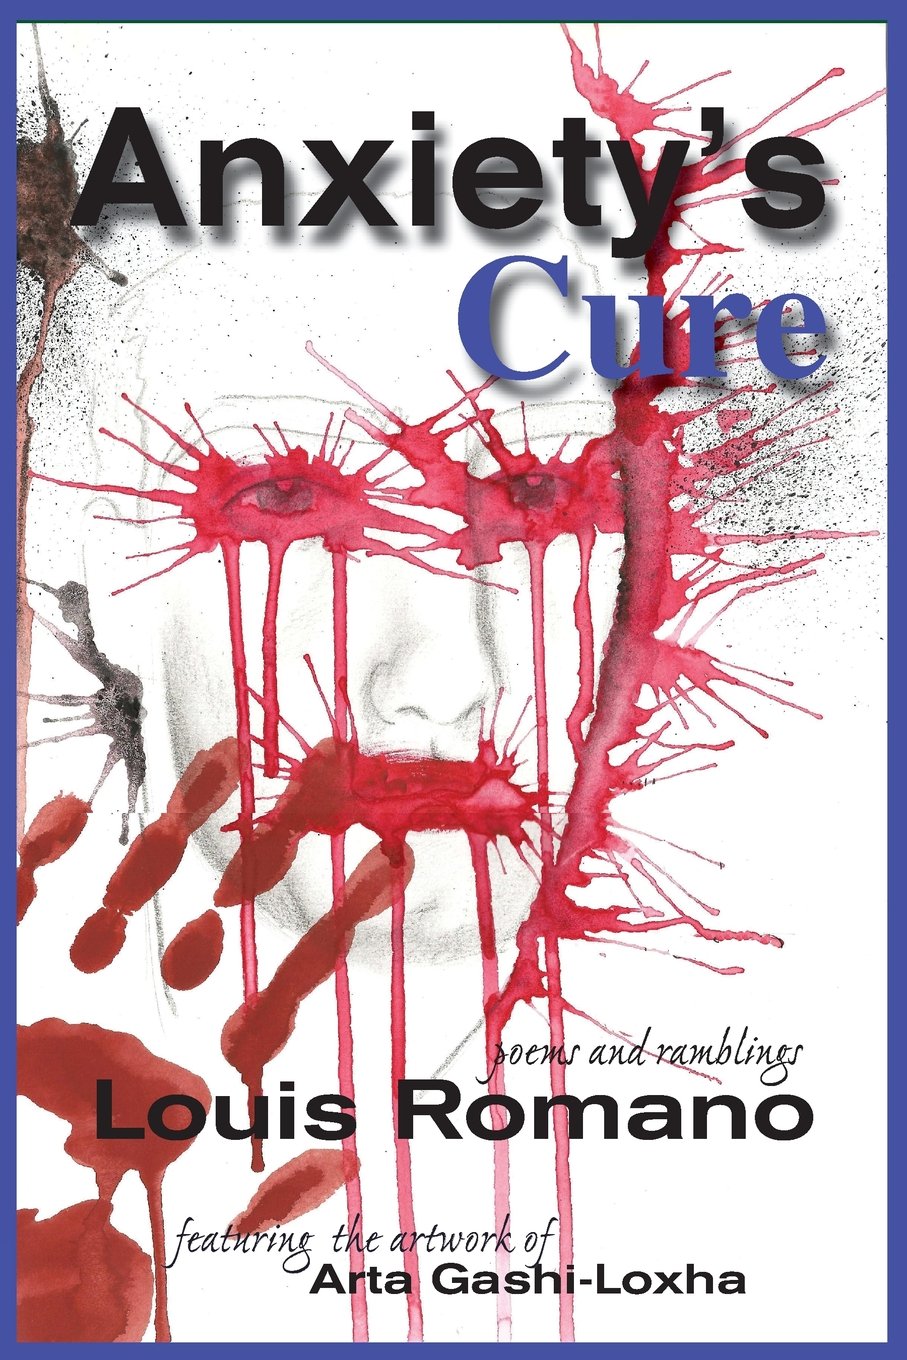 Anxiety's Cure Paperback – February 18, 2013